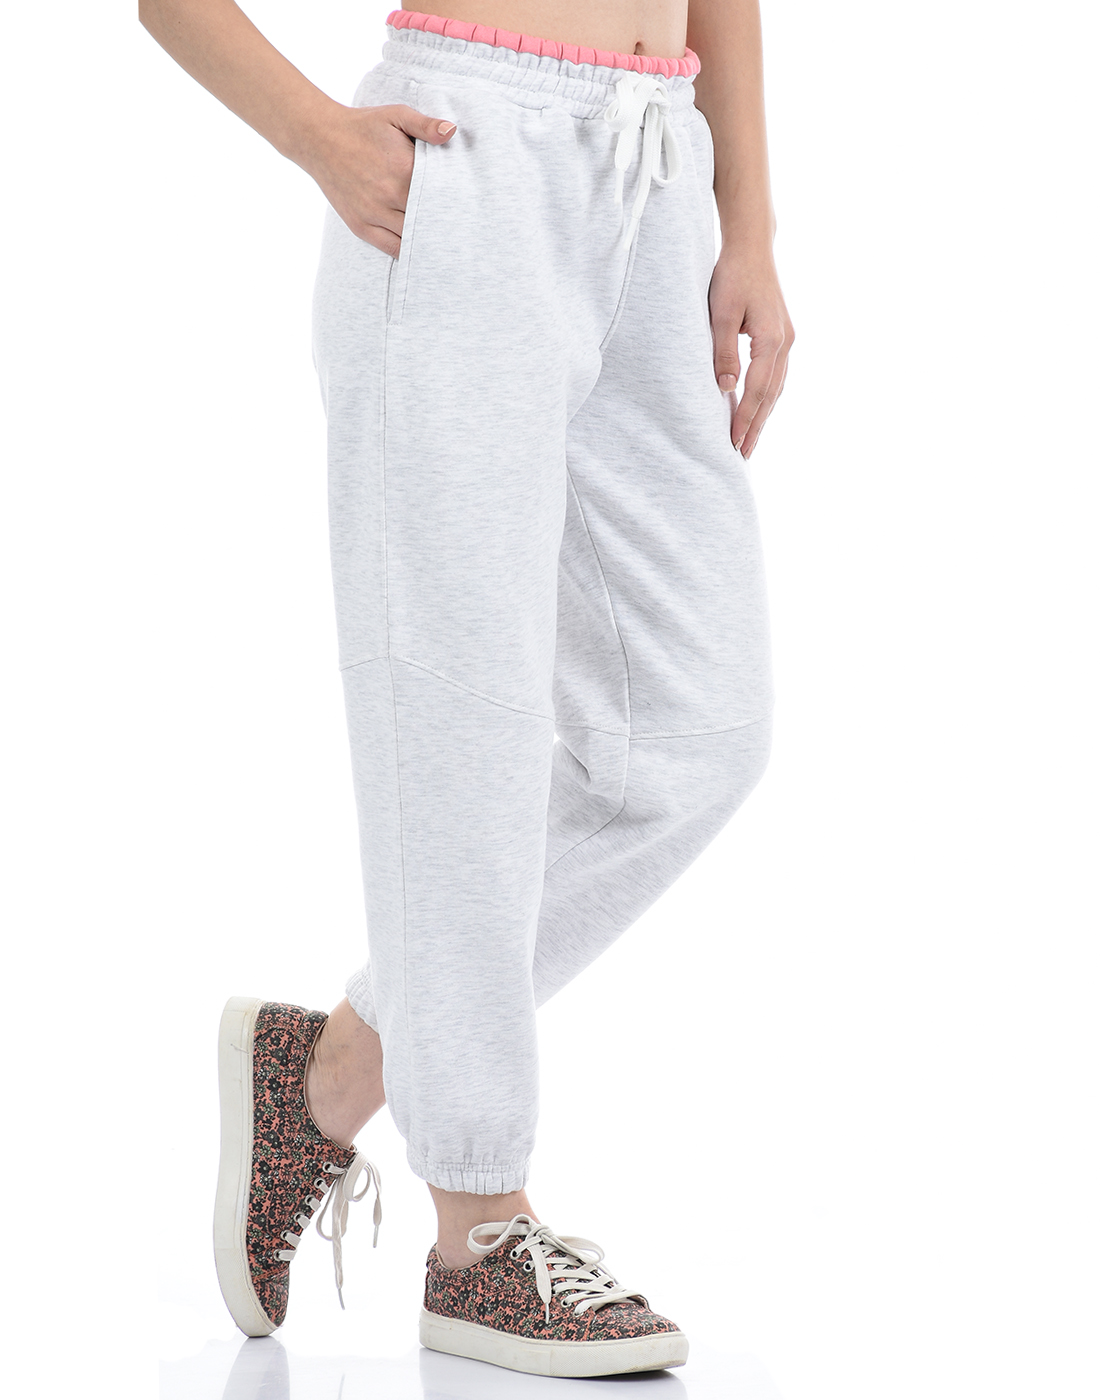 Oneway Women Solid Grey Track Pants